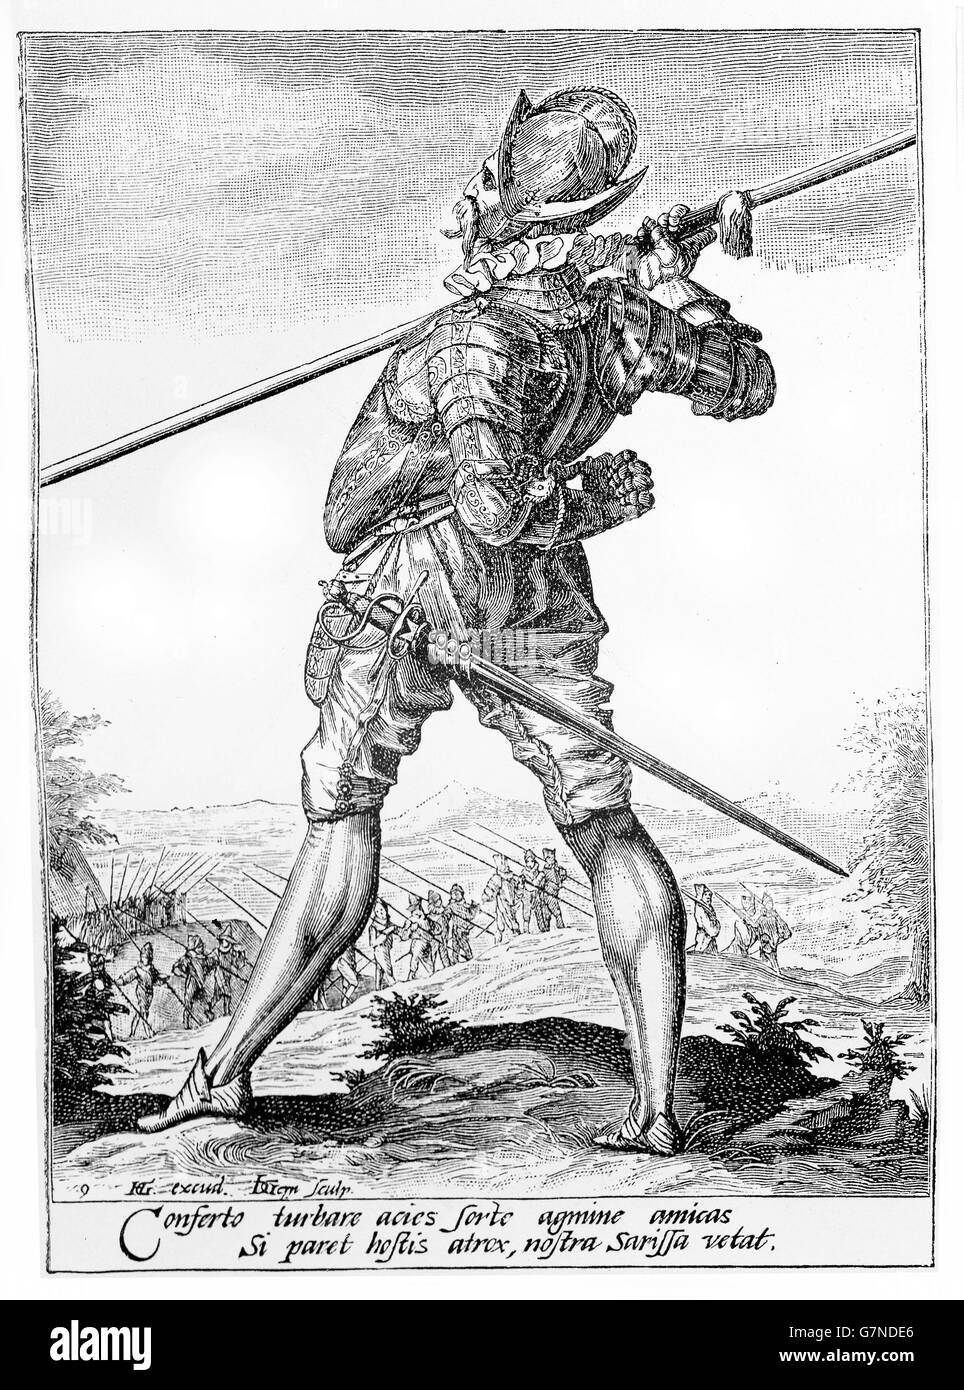 1600, illustration depicting a guard with helm, armor,spear and sword of Rudolf II of Habsburg, Holy Roman Emperor, King of Bohemia and Archduke of Austria Stock Photo